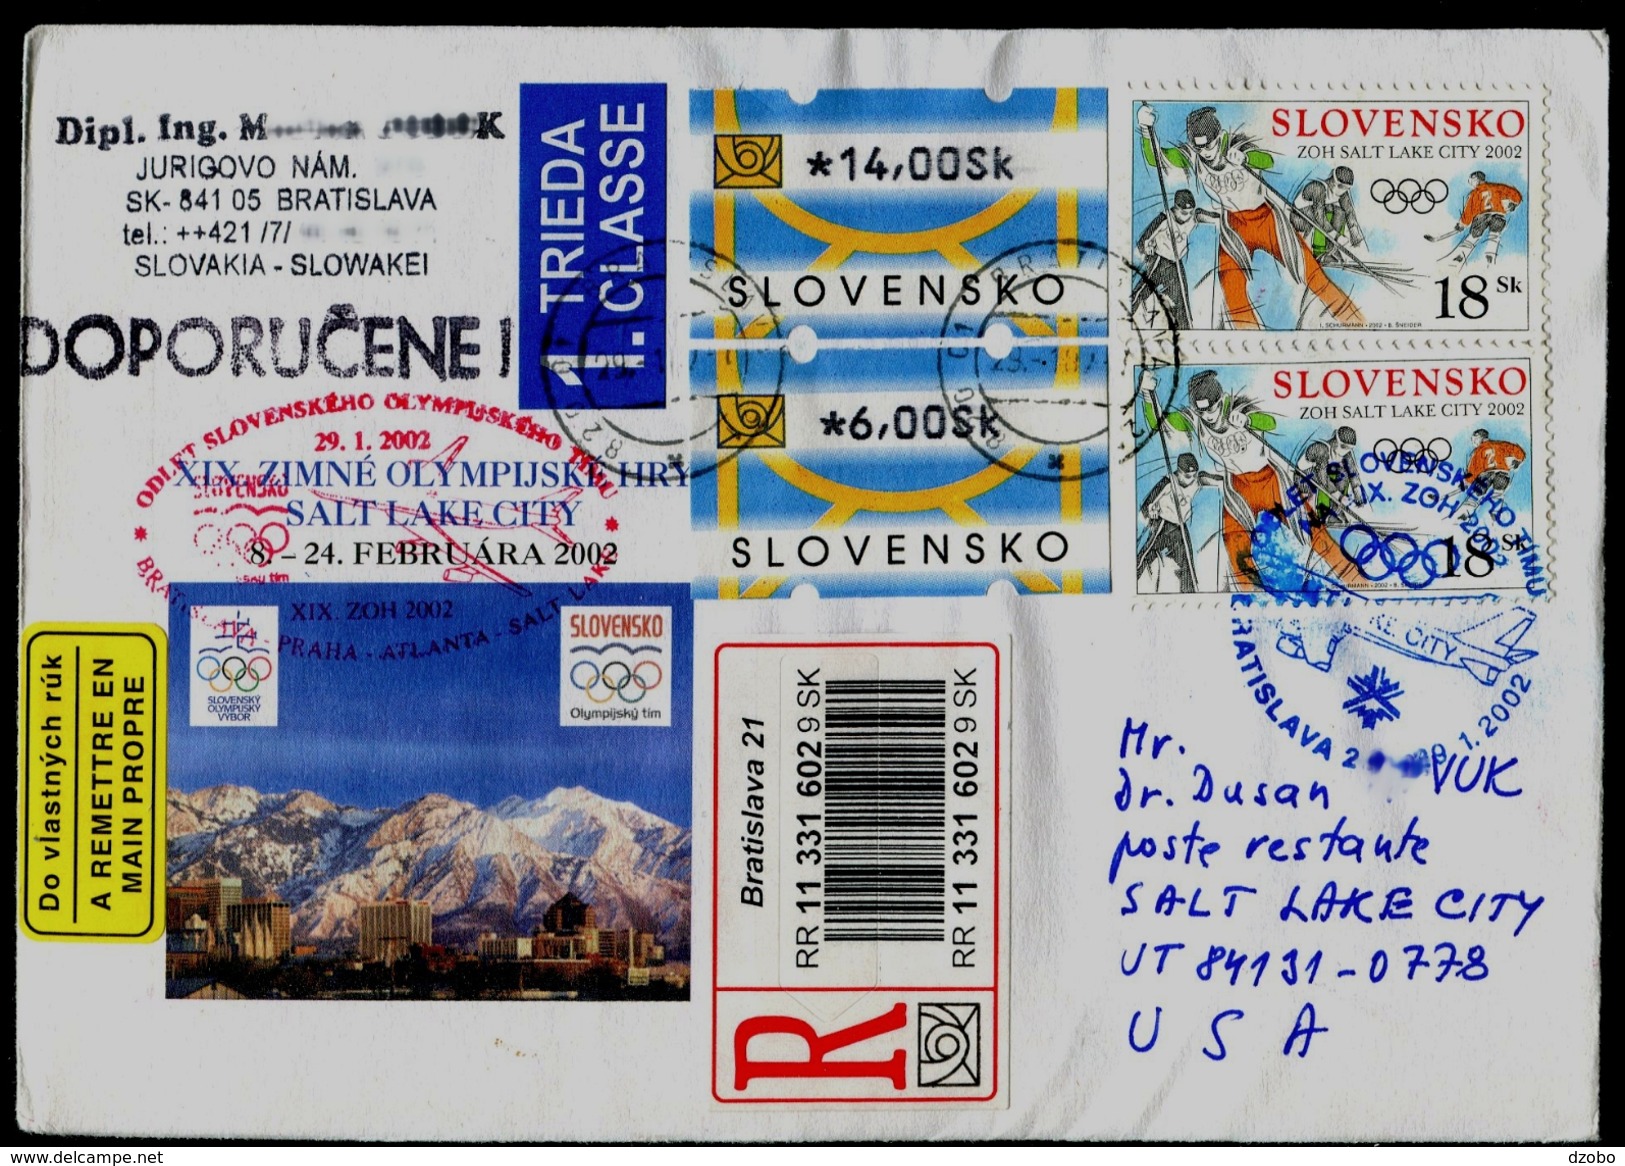 527-SLOVAKIA R-Brief-letter SALT LAKE CITY Olympiade-Olympia Abfahrt Team-departure Of The Team Commemorative Stamp 2002 - Inverno2002: Salt Lake City - Paralympic